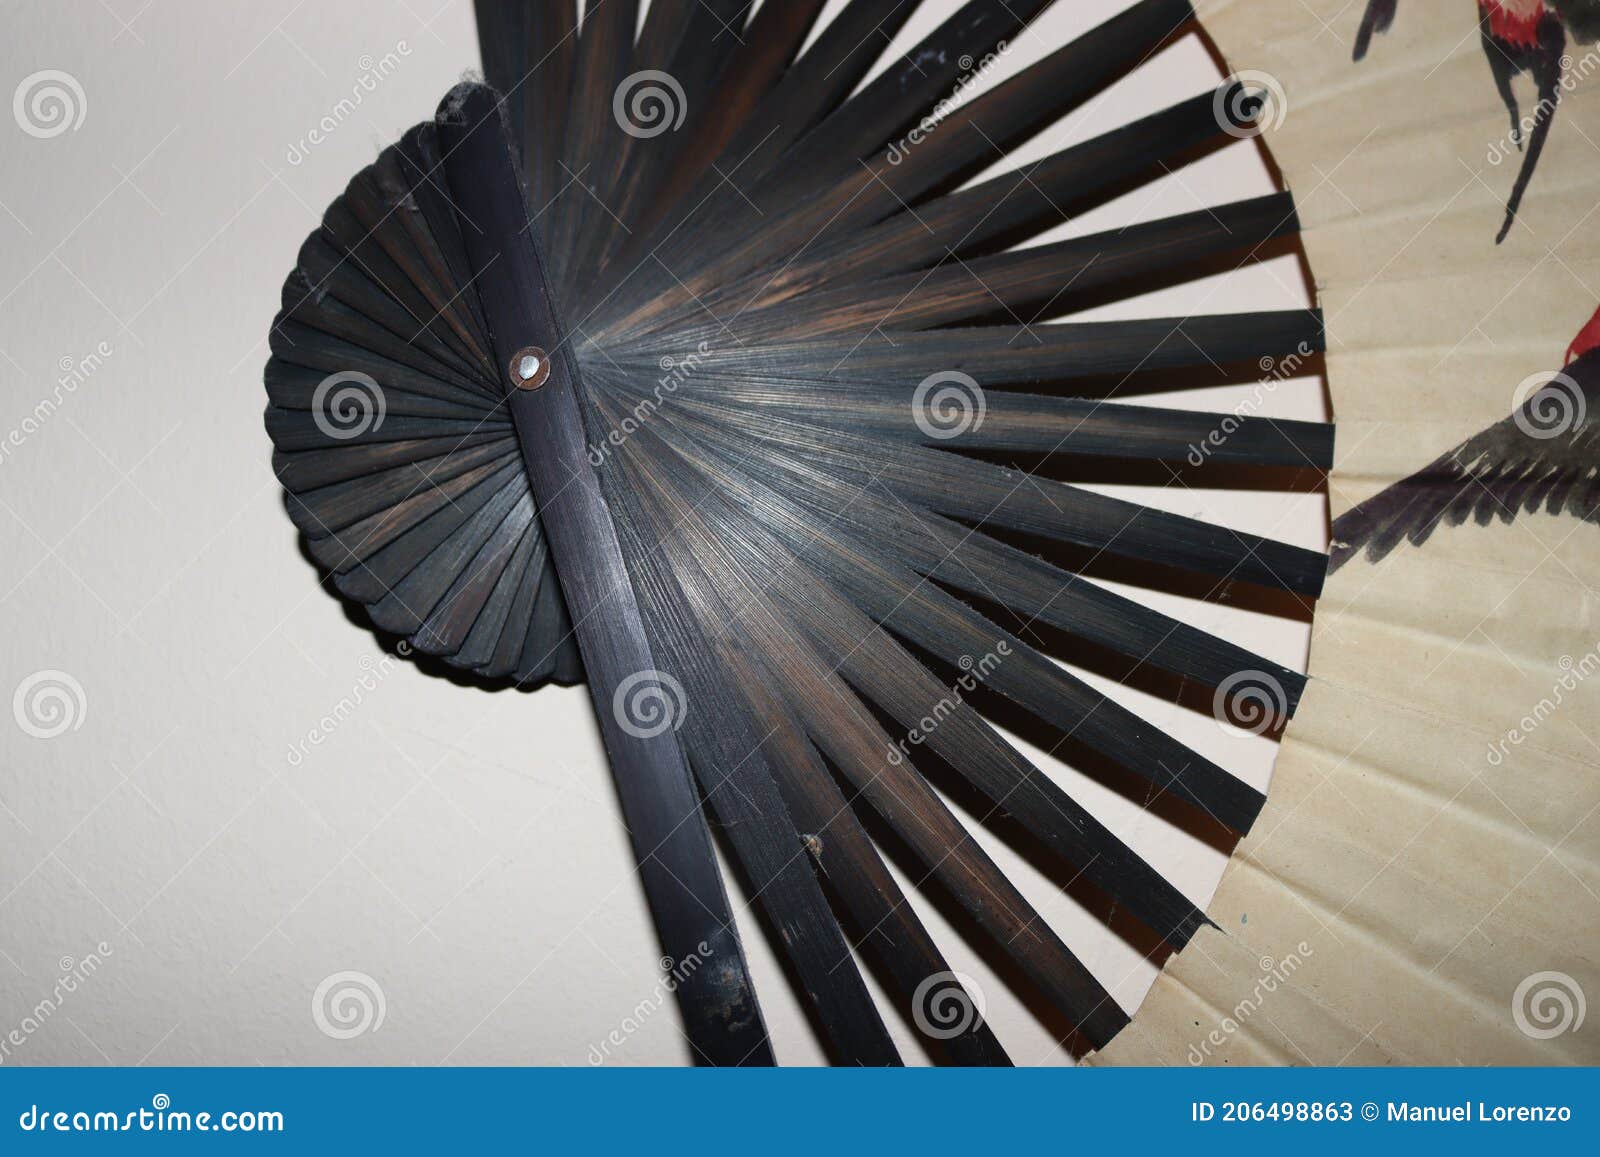 beautiful chinese fan to give air cool lid move